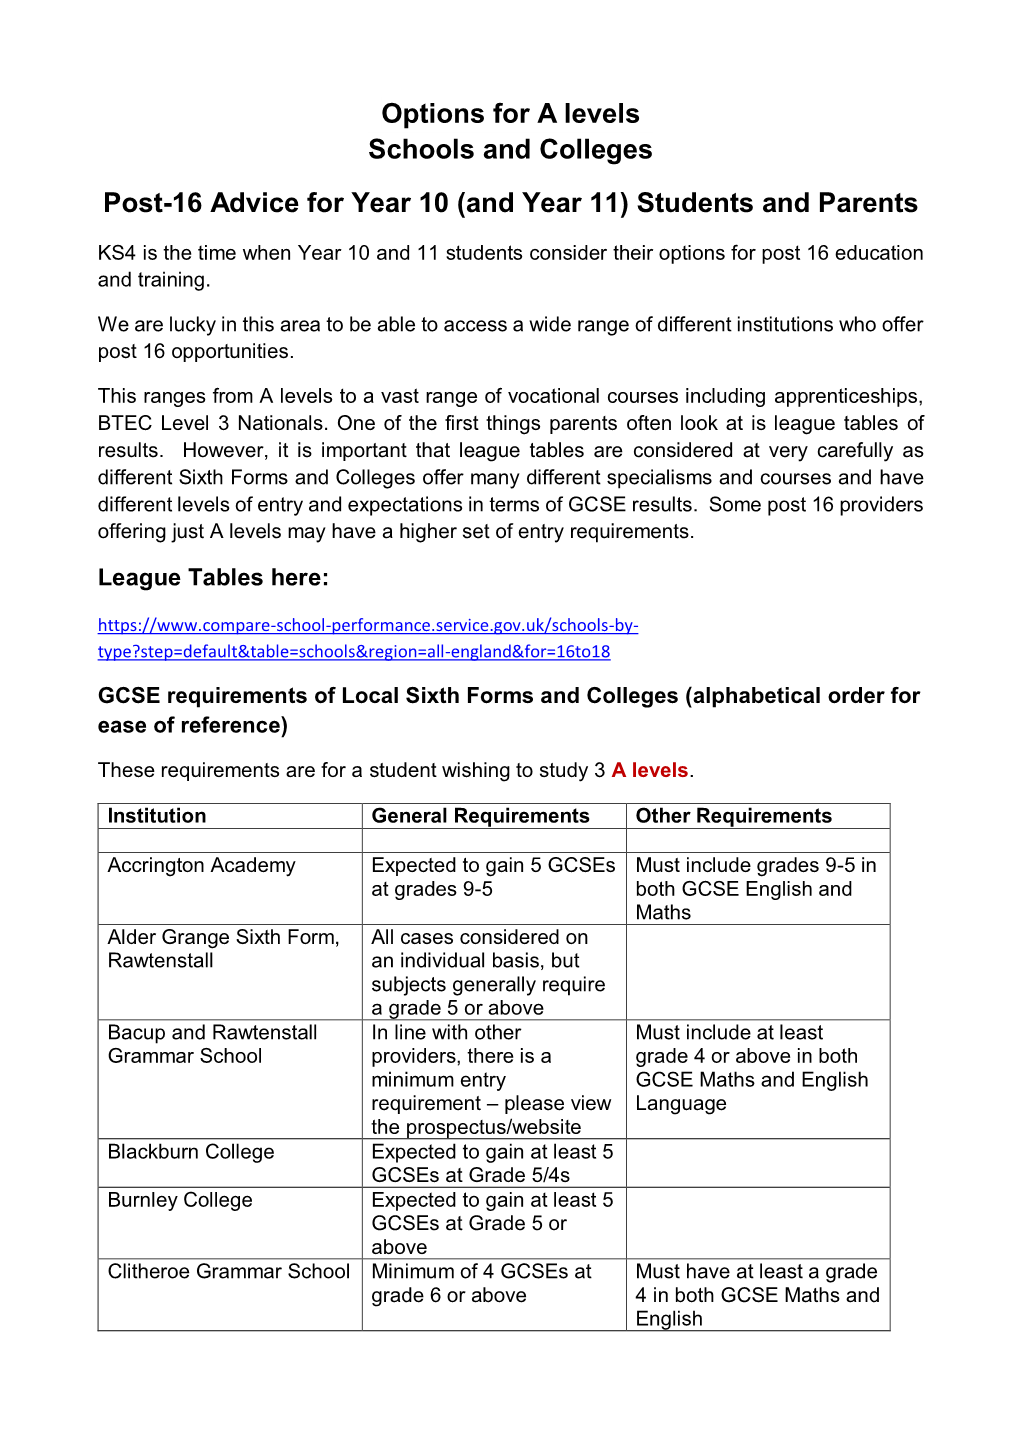 Options for a Levels Schools and Colleges Post-16 Advice for Year 10 (And Year 11) Students and Parents